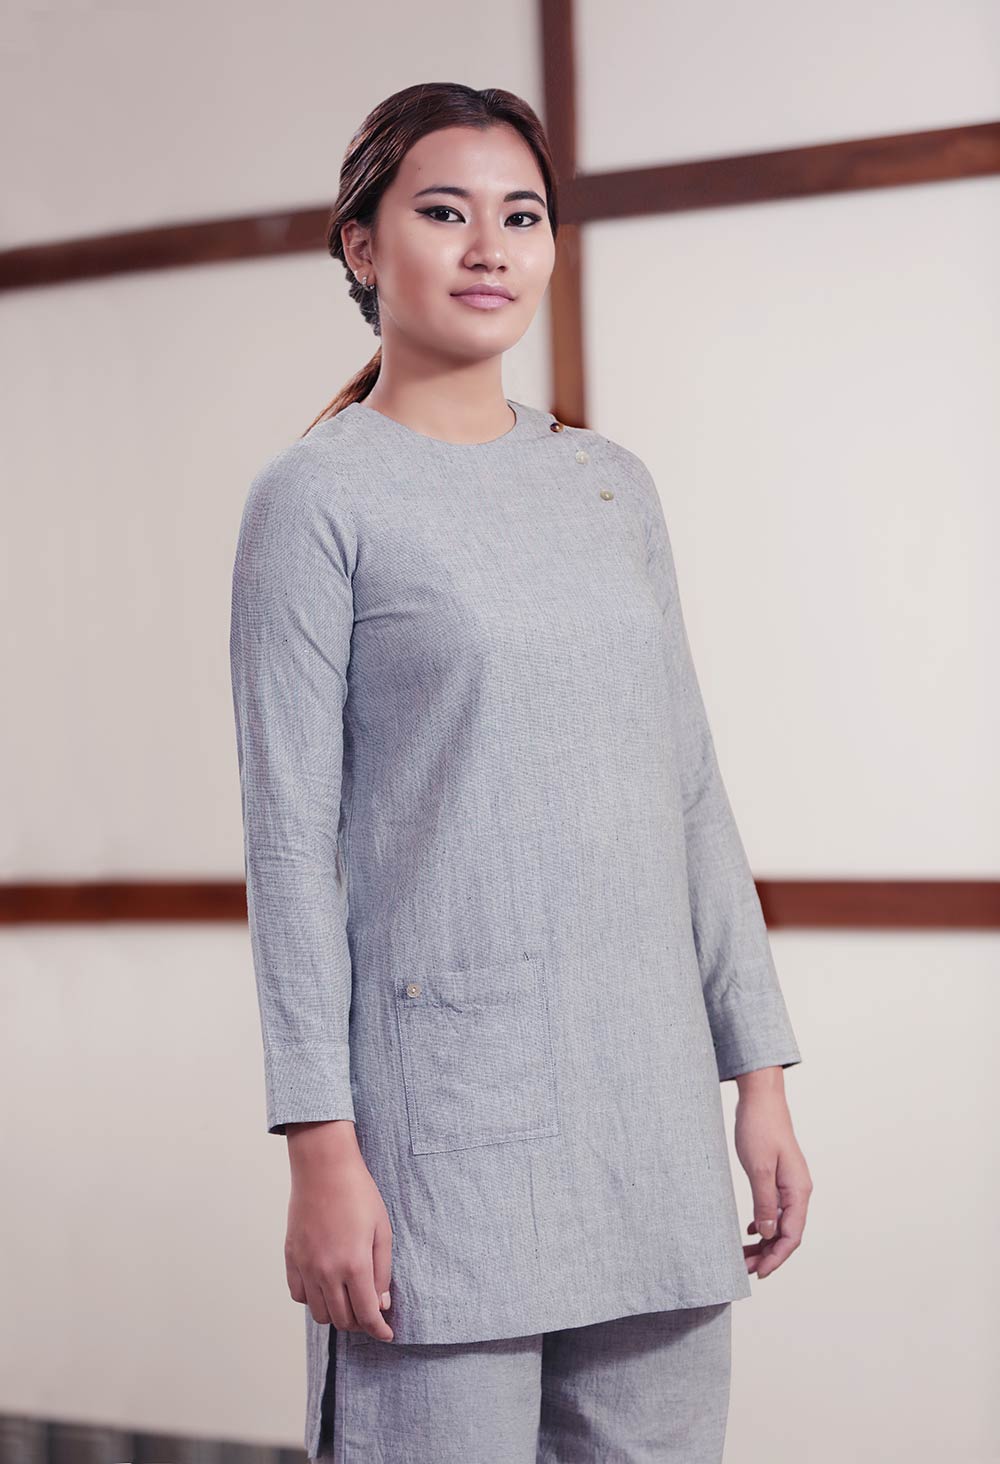 Handwoven cotton High low hem straight top, full sleeves designed by Khumanthem Atelier